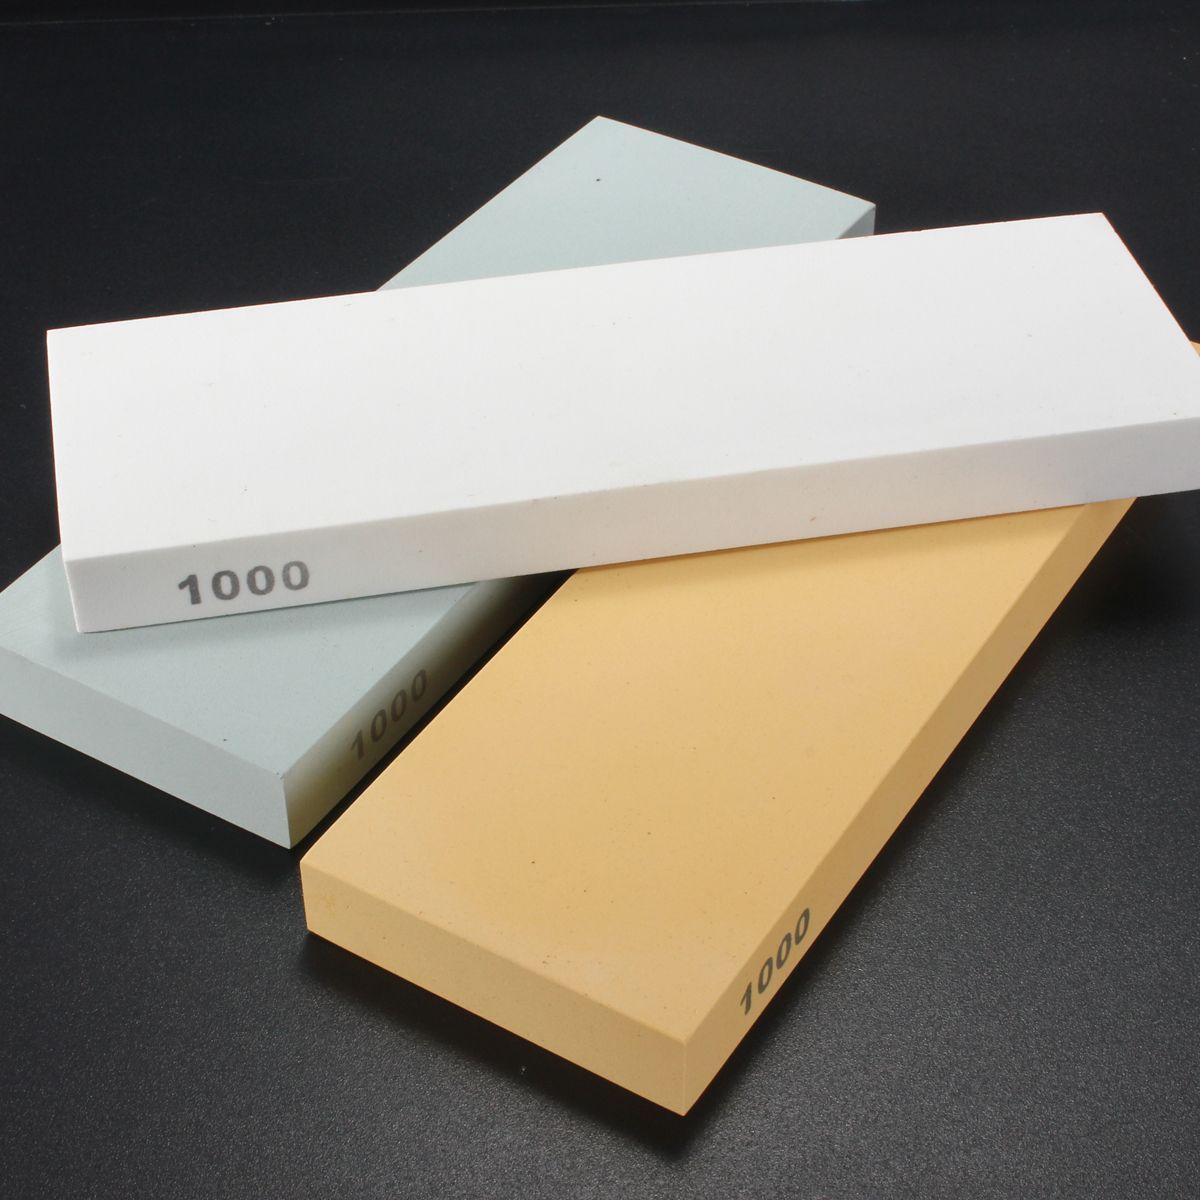 1000-Grit-Whetstone-Sharpener-Sharpen-Stone-With-Stand-180mm-x-60mm-x-15mm-1324622